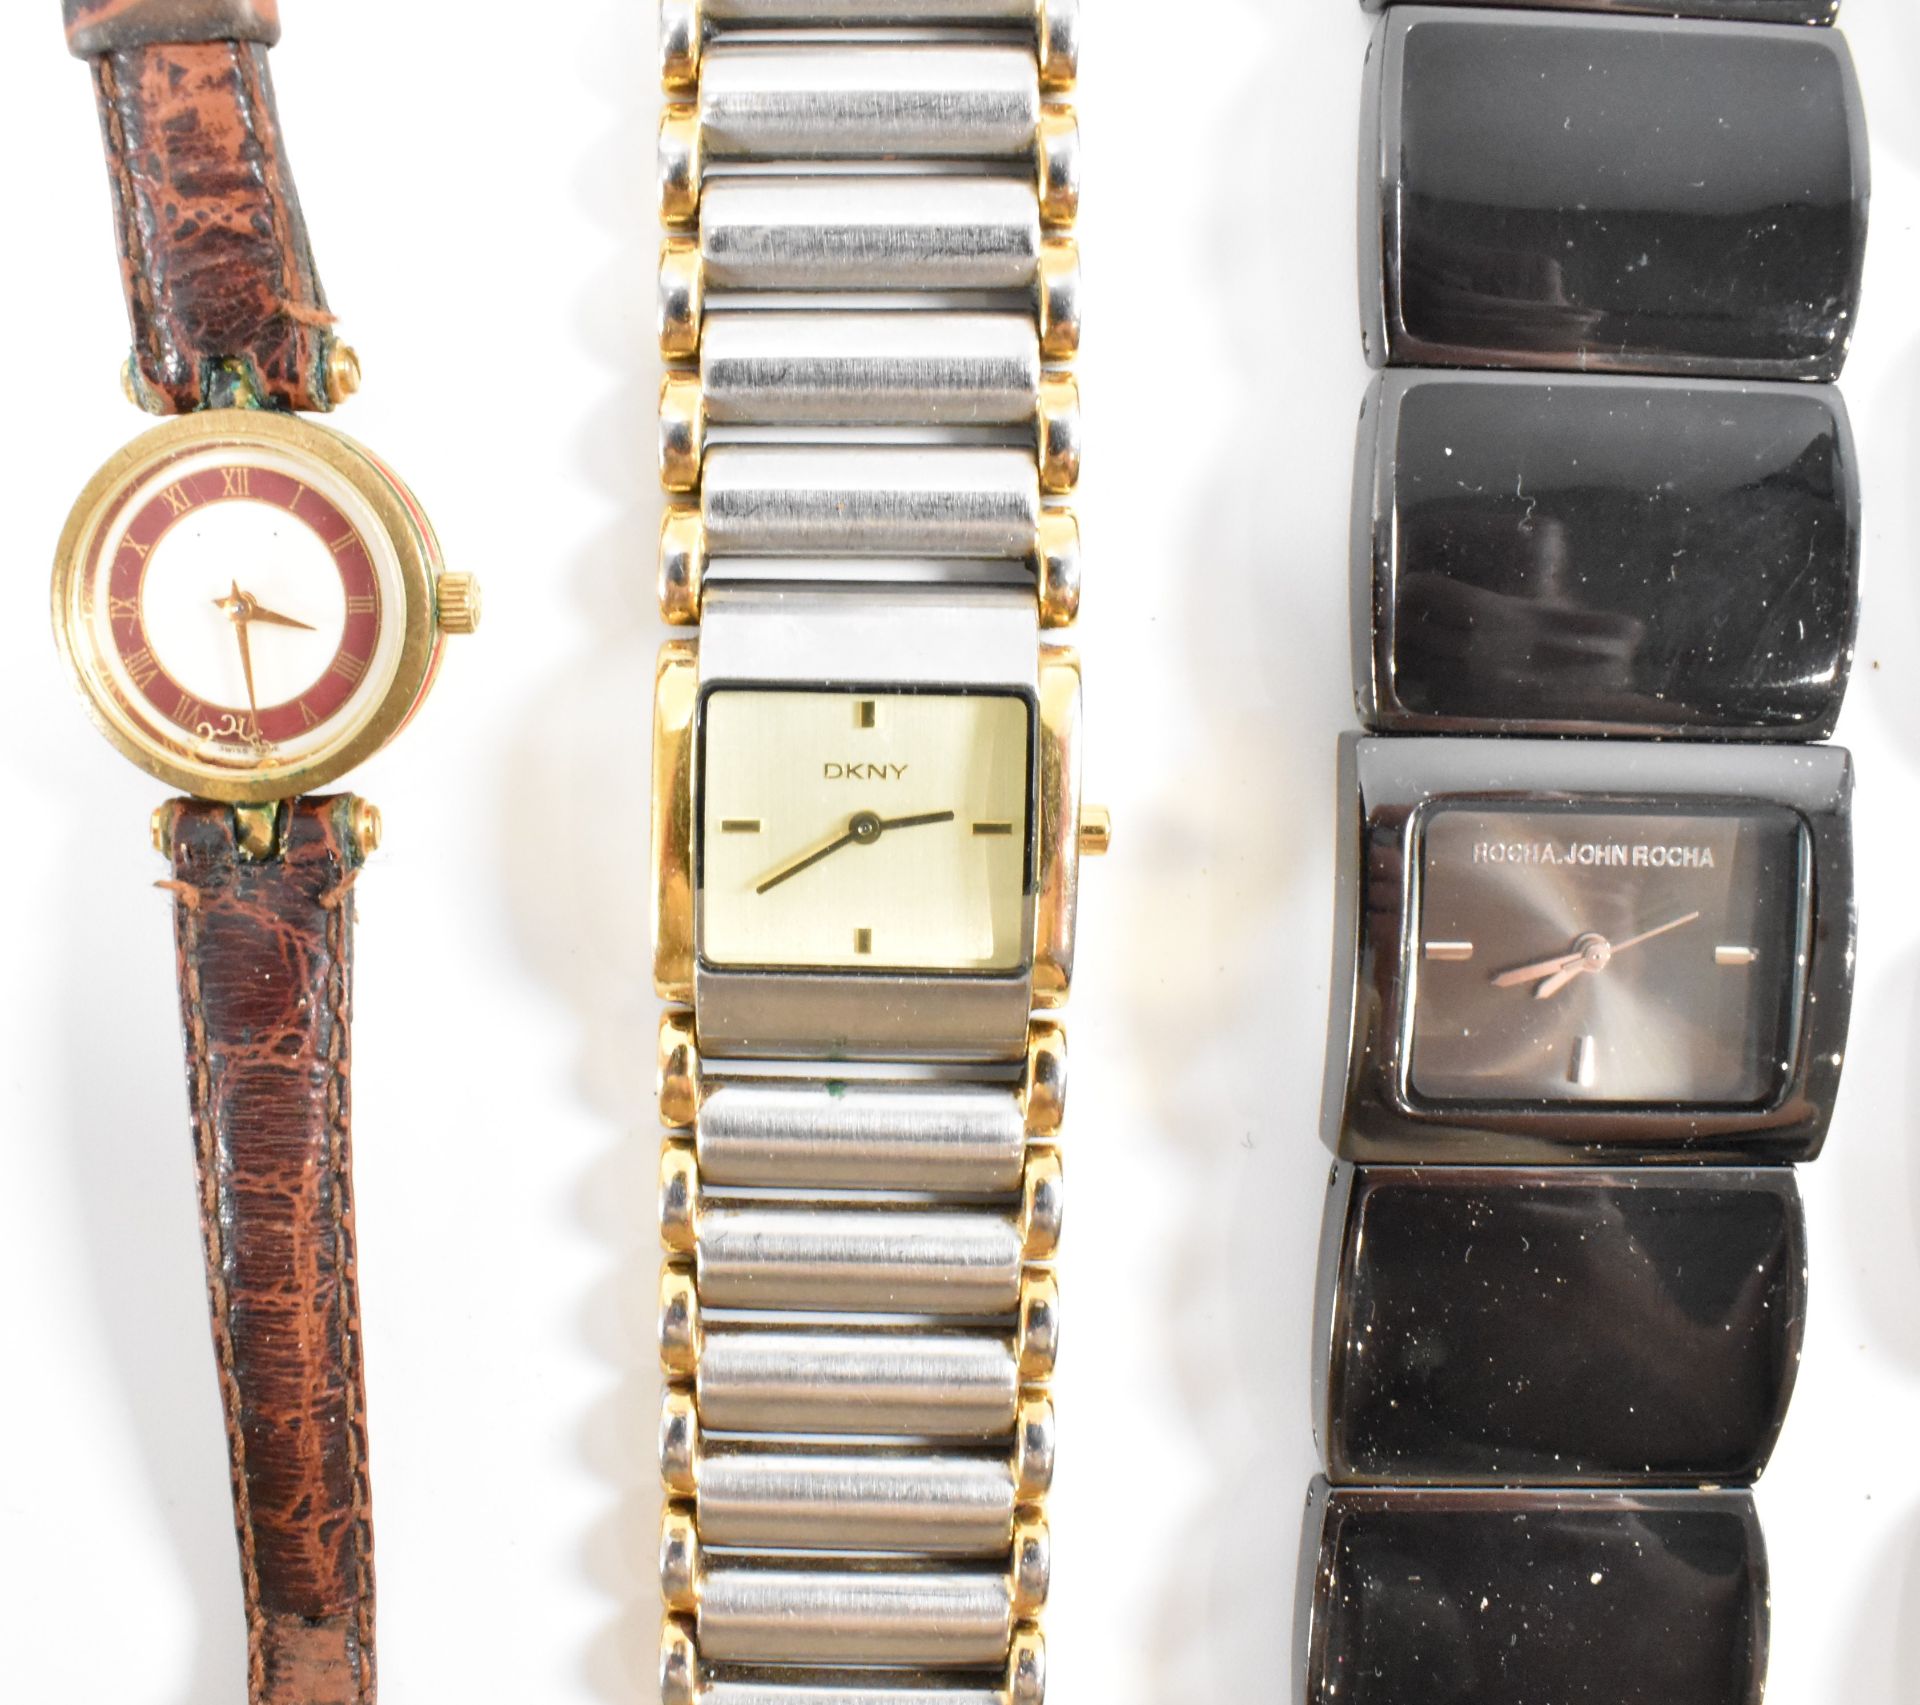 ASSORTMENT OF VINTAGE LADIES WRIST WATCHES - Image 7 of 10